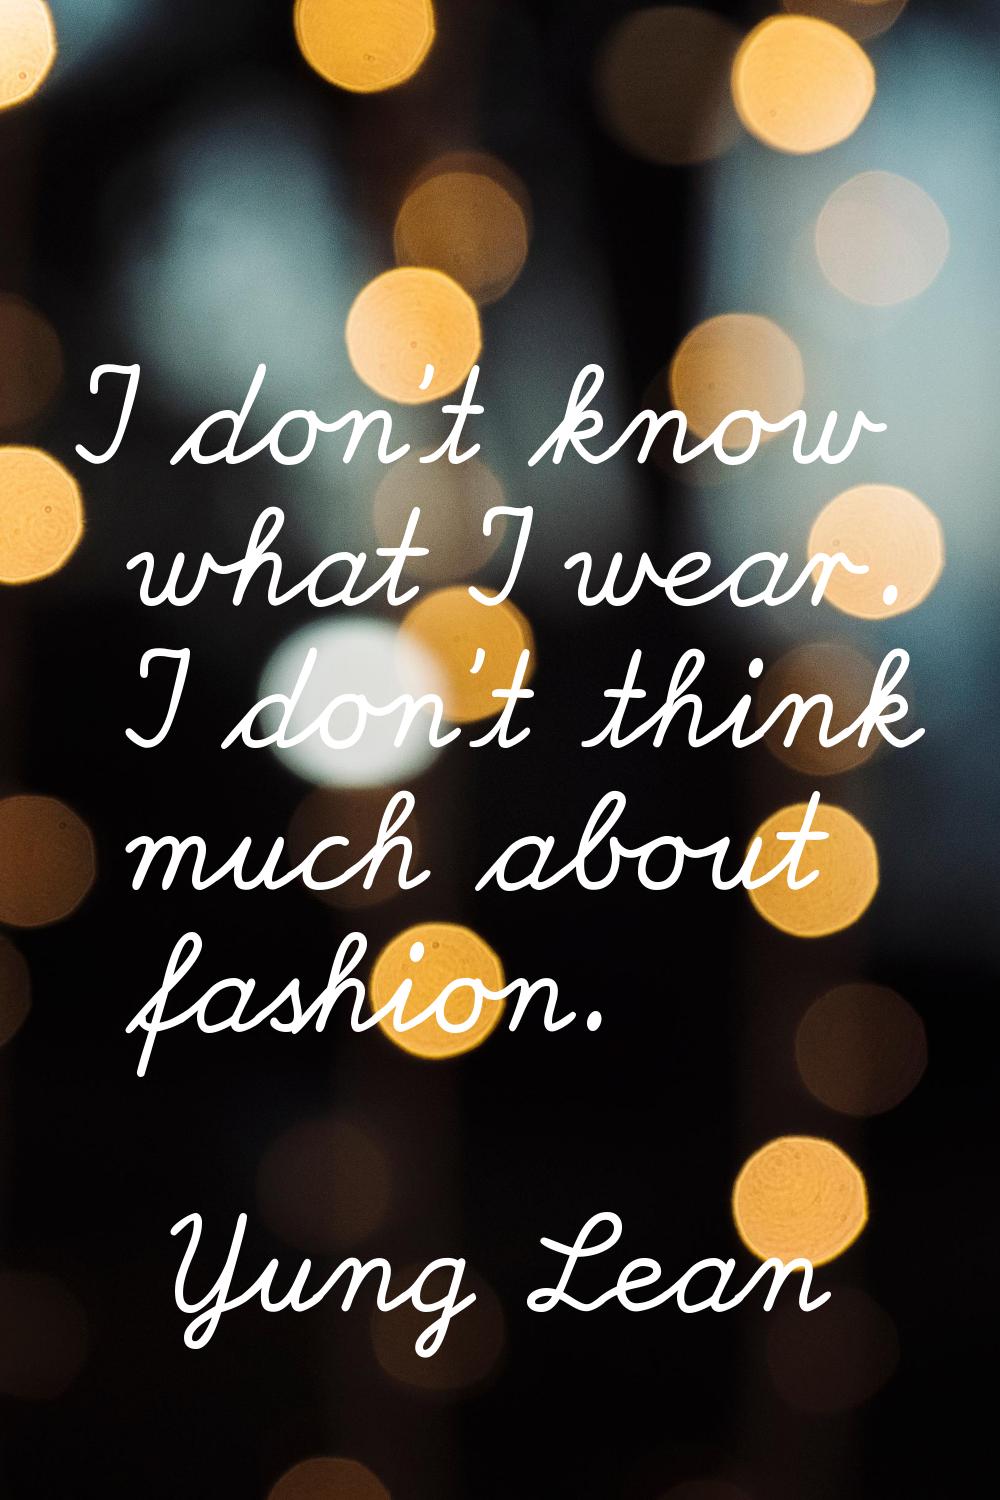 I don't know what I wear. I don't think much about fashion.